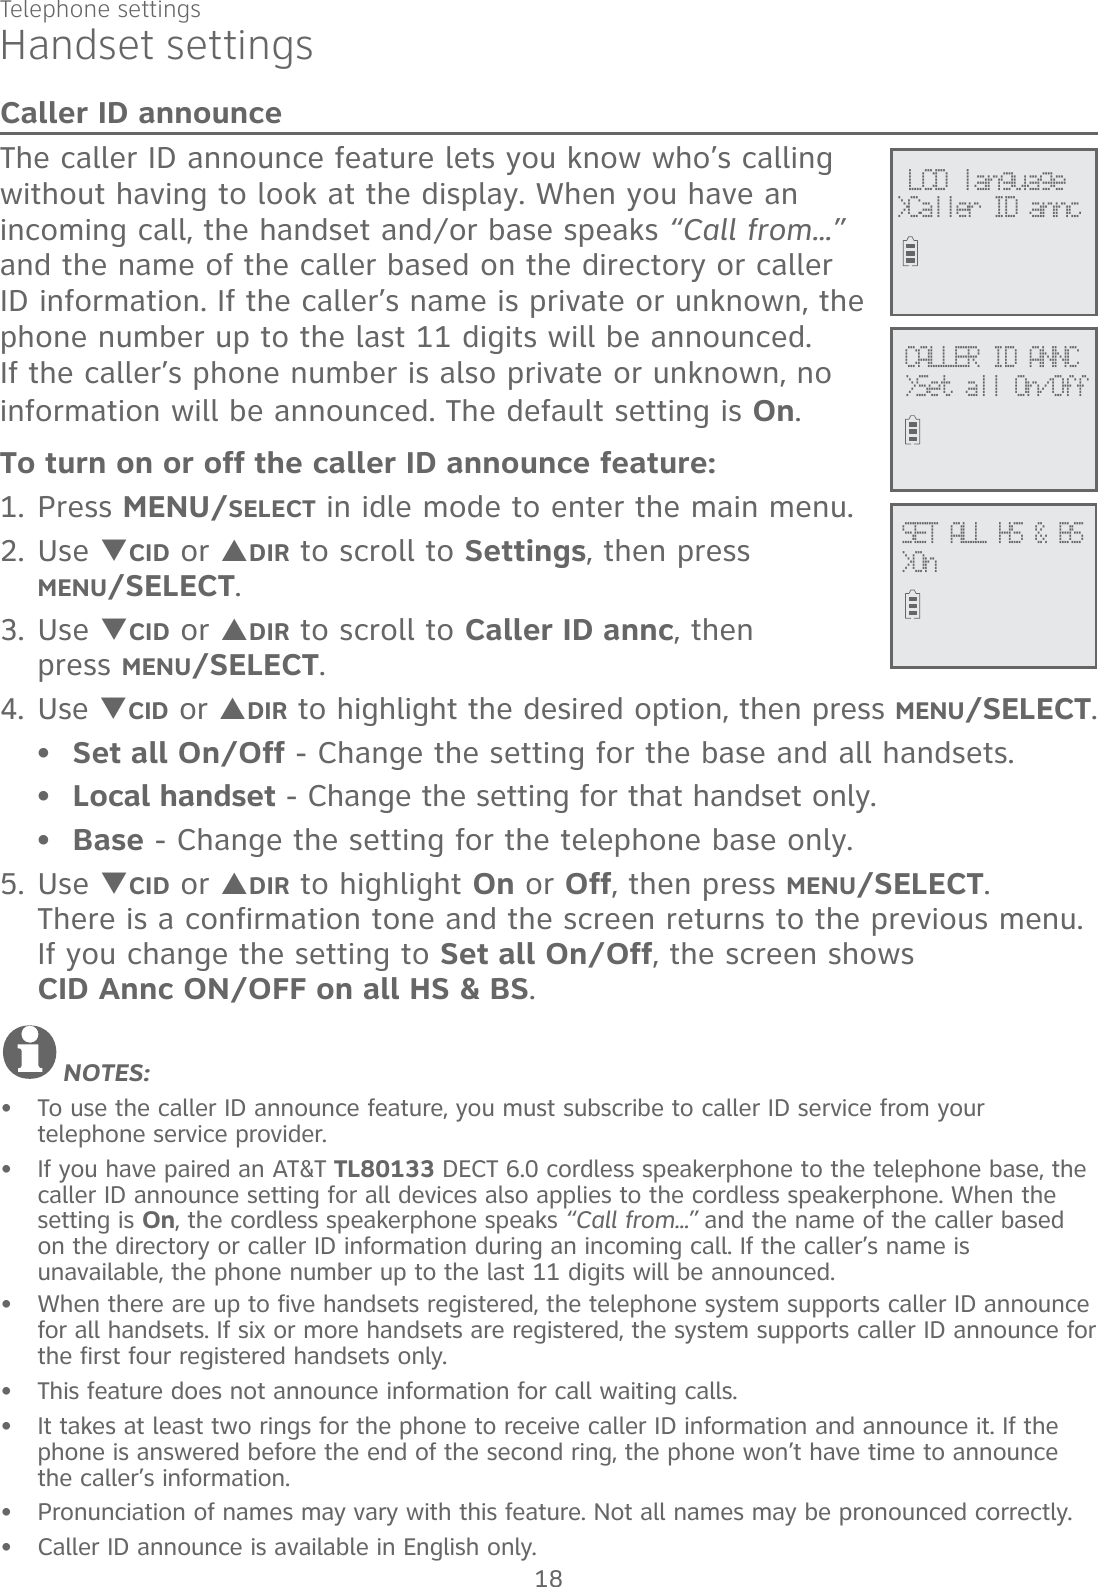 Telephone settings18Handset settingsCaller ID announceThe caller ID announce feature lets you know who’s calling without having to look at the display. When you have an incoming call, the handset and/or base speaks “Call from...” and the name of the caller based on the directory or caller ID information. If the caller’s name is private or unknown, the phone number up to the last 11 digits will be announced. If the caller’s phone number is also private or unknown, no information will be announced. The default setting is On.To turn on or off the caller ID announce feature:1. Press MENU/SELECT in idle mode to enter the main menu.2. Use TCID or SDIR to scroll to Settings, then press  MENU/SELECT. 3. Use TCID or SDIR to scroll to Caller ID annc, then  press MENU/SELECT. 4. Use TCID or SDIR to highlight the desired option, then press MENU/SELECT.Set all On/Off - Change the setting for the base and all handsets.Local handset - Change the setting for that handset only.Base - Change the setting for the telephone base only.5. Use TCID or SDIR to highlight On or Off, then press MENU/SELECT.  There is a confirmation tone and the screen returns to the previous menu. If you change the setting to Set all On/Off, the screen shows  CID Annc ON/OFF on all HS &amp; BS.NOTES: To use the caller ID announce feature, you must subscribe to caller ID service from your  telephone service provider.If you have paired an AT&amp;T TL80133 DECT 6.0 cordless speakerphone to the telephone base, the caller ID announce setting for all devices also applies to the cordless speakerphone. When the setting is On, the cordless speakerphone speaks “Call from...” and the name of the caller based on the directory or caller ID information during an incoming call. If the caller’s name is  unavailable, the phone number up to the last 11 digits will be announced.When there are up to five handsets registered, the telephone system supports caller ID announce for all handsets. If six or more handsets are registered, the system supports caller ID announce for the first four registered handsets only.This feature does not announce information for call waiting calls.It takes at least two rings for the phone to receive caller ID information and announce it. If the phone is answered before the end of the second ring, the phone won’t have time to announce the caller’s information.Pronunciation of names may vary with this feature. Not all names may be pronounced correctly.Caller ID announce is available in English only.••••••••••SET ALL HS &amp; BS&gt;OnCALLER ID ANNC&gt;Set all On/Off LCD language&gt;Caller ID annc